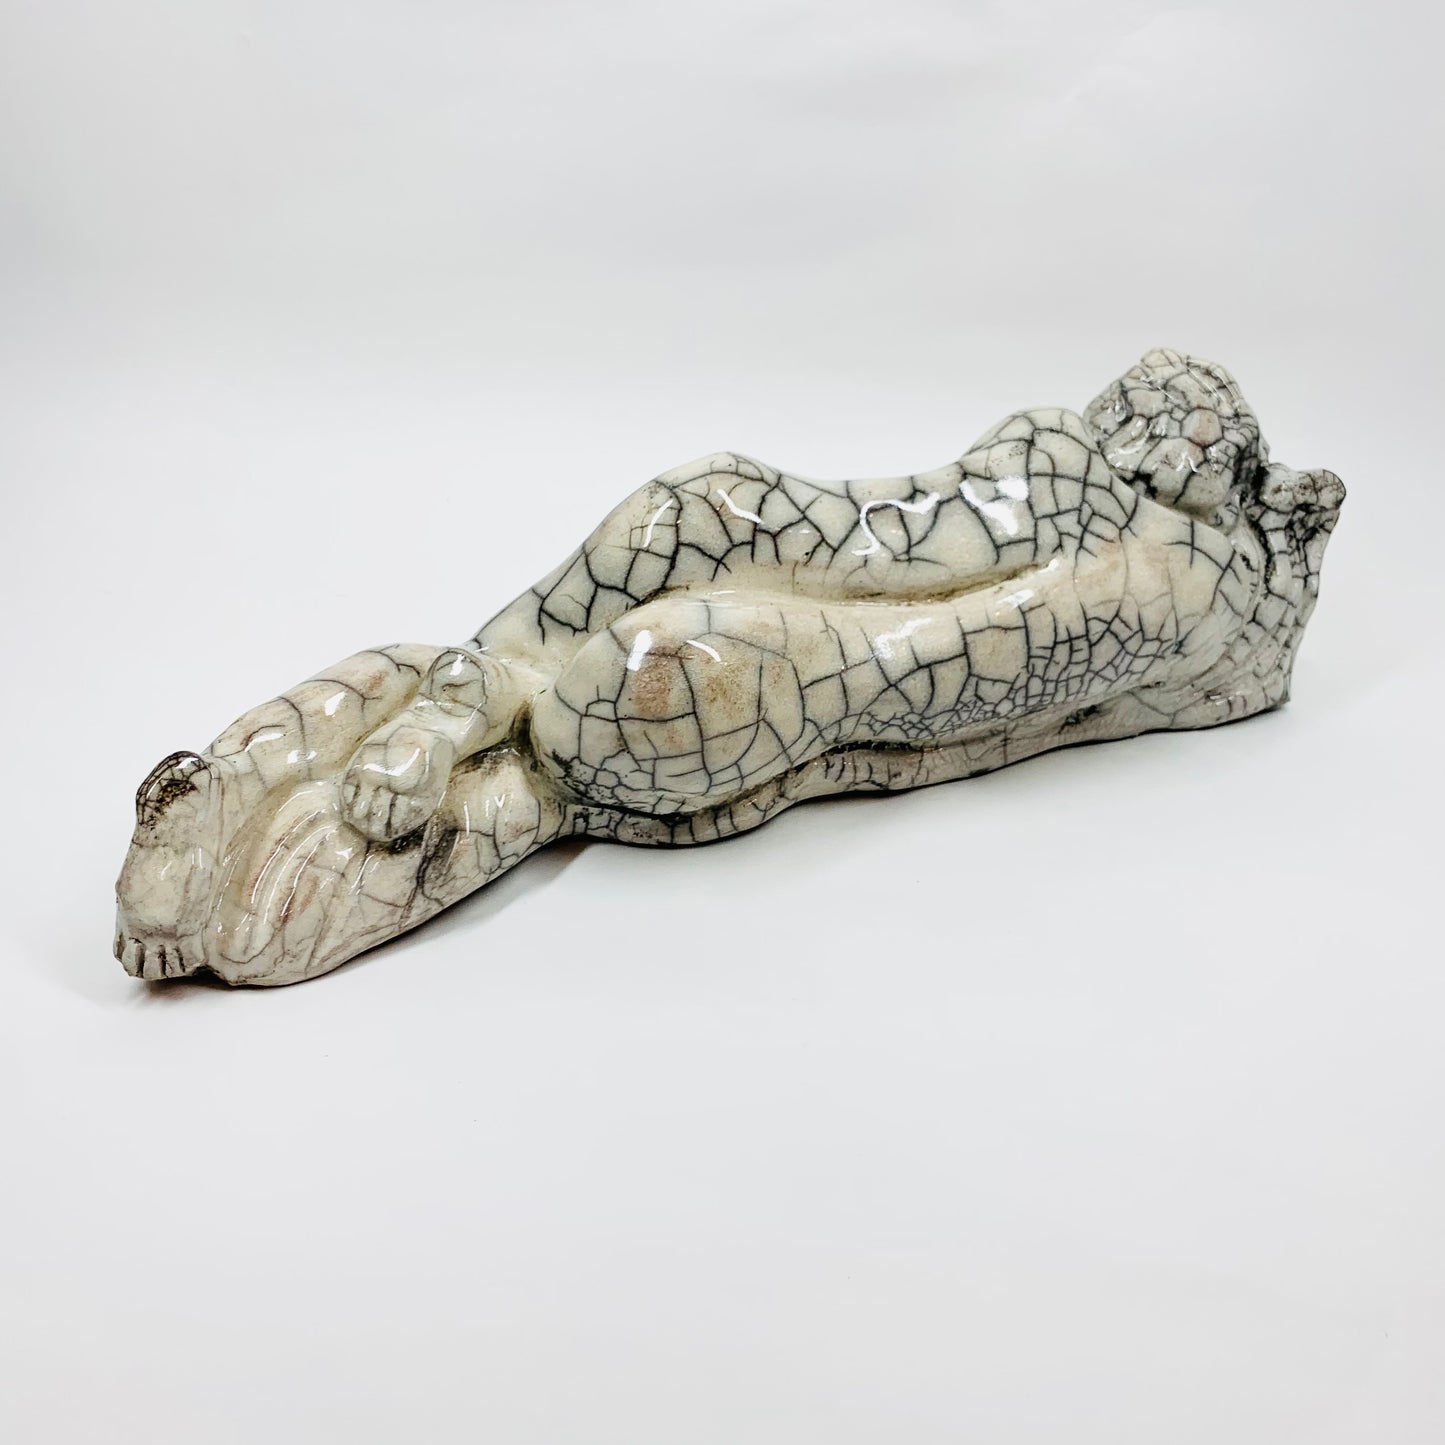 ABSTRACT CRACKLE POTTERY SCULPTURE